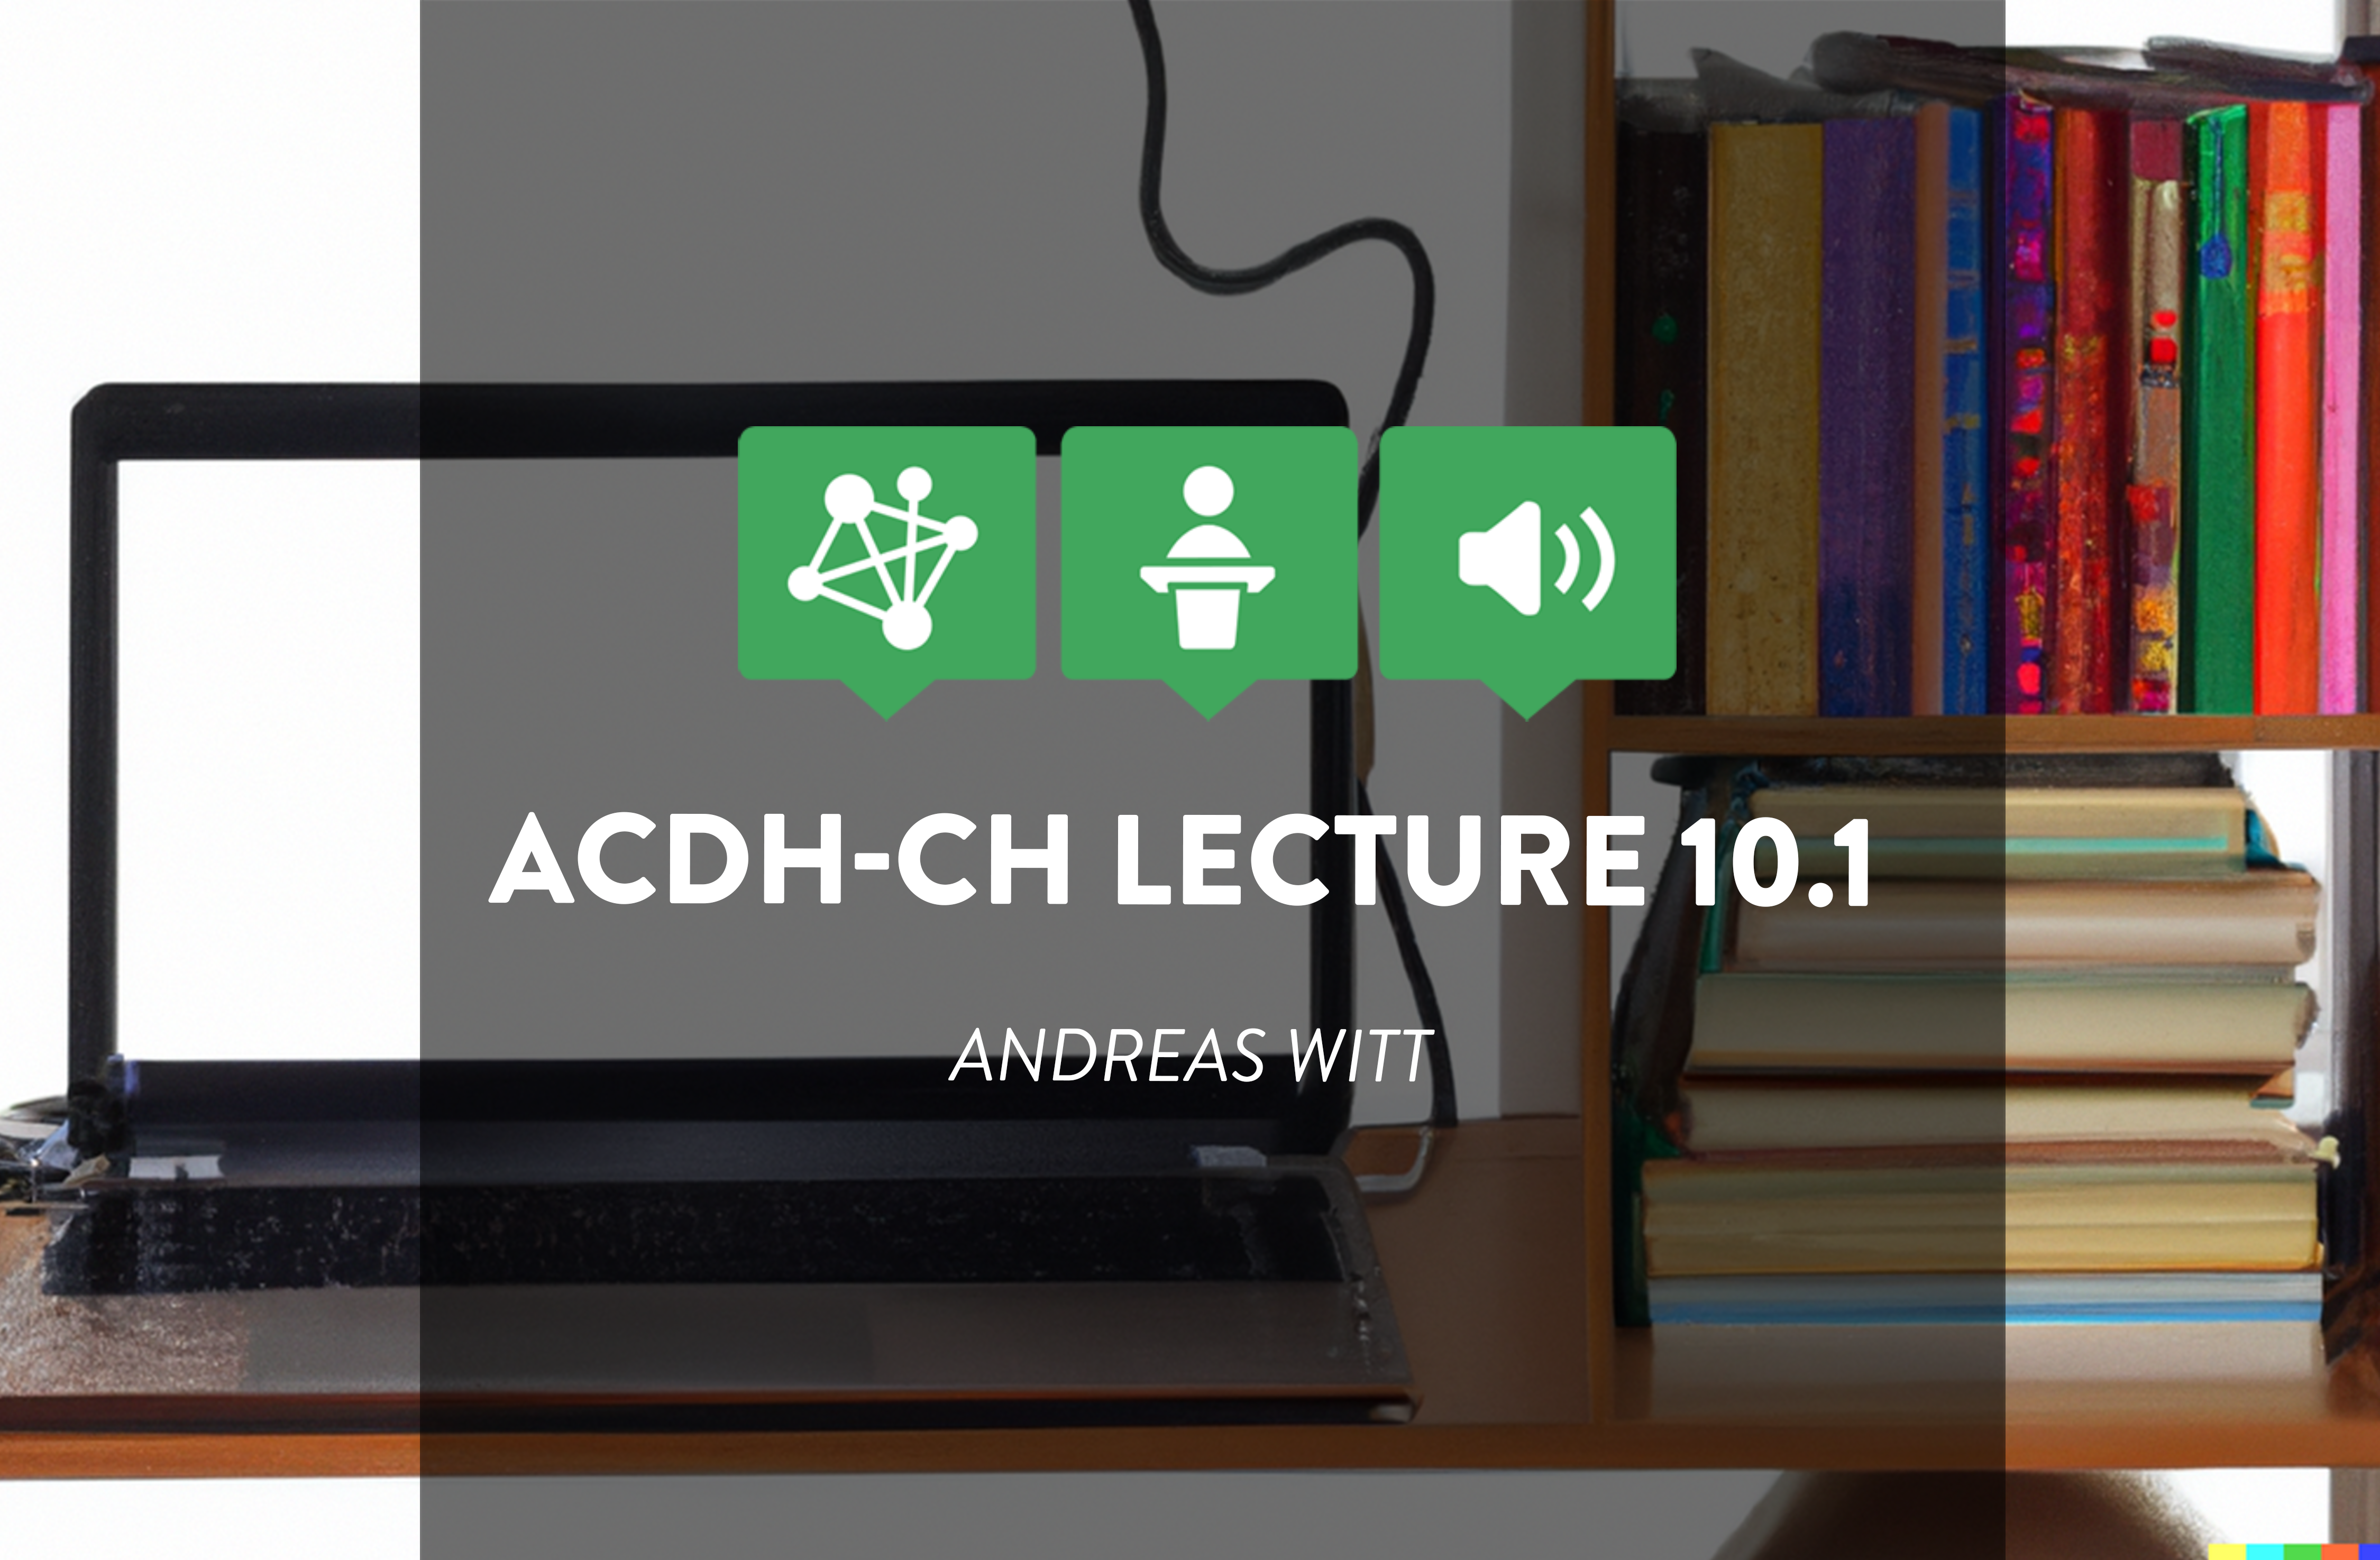 ACDH-CH Lecture 10.1